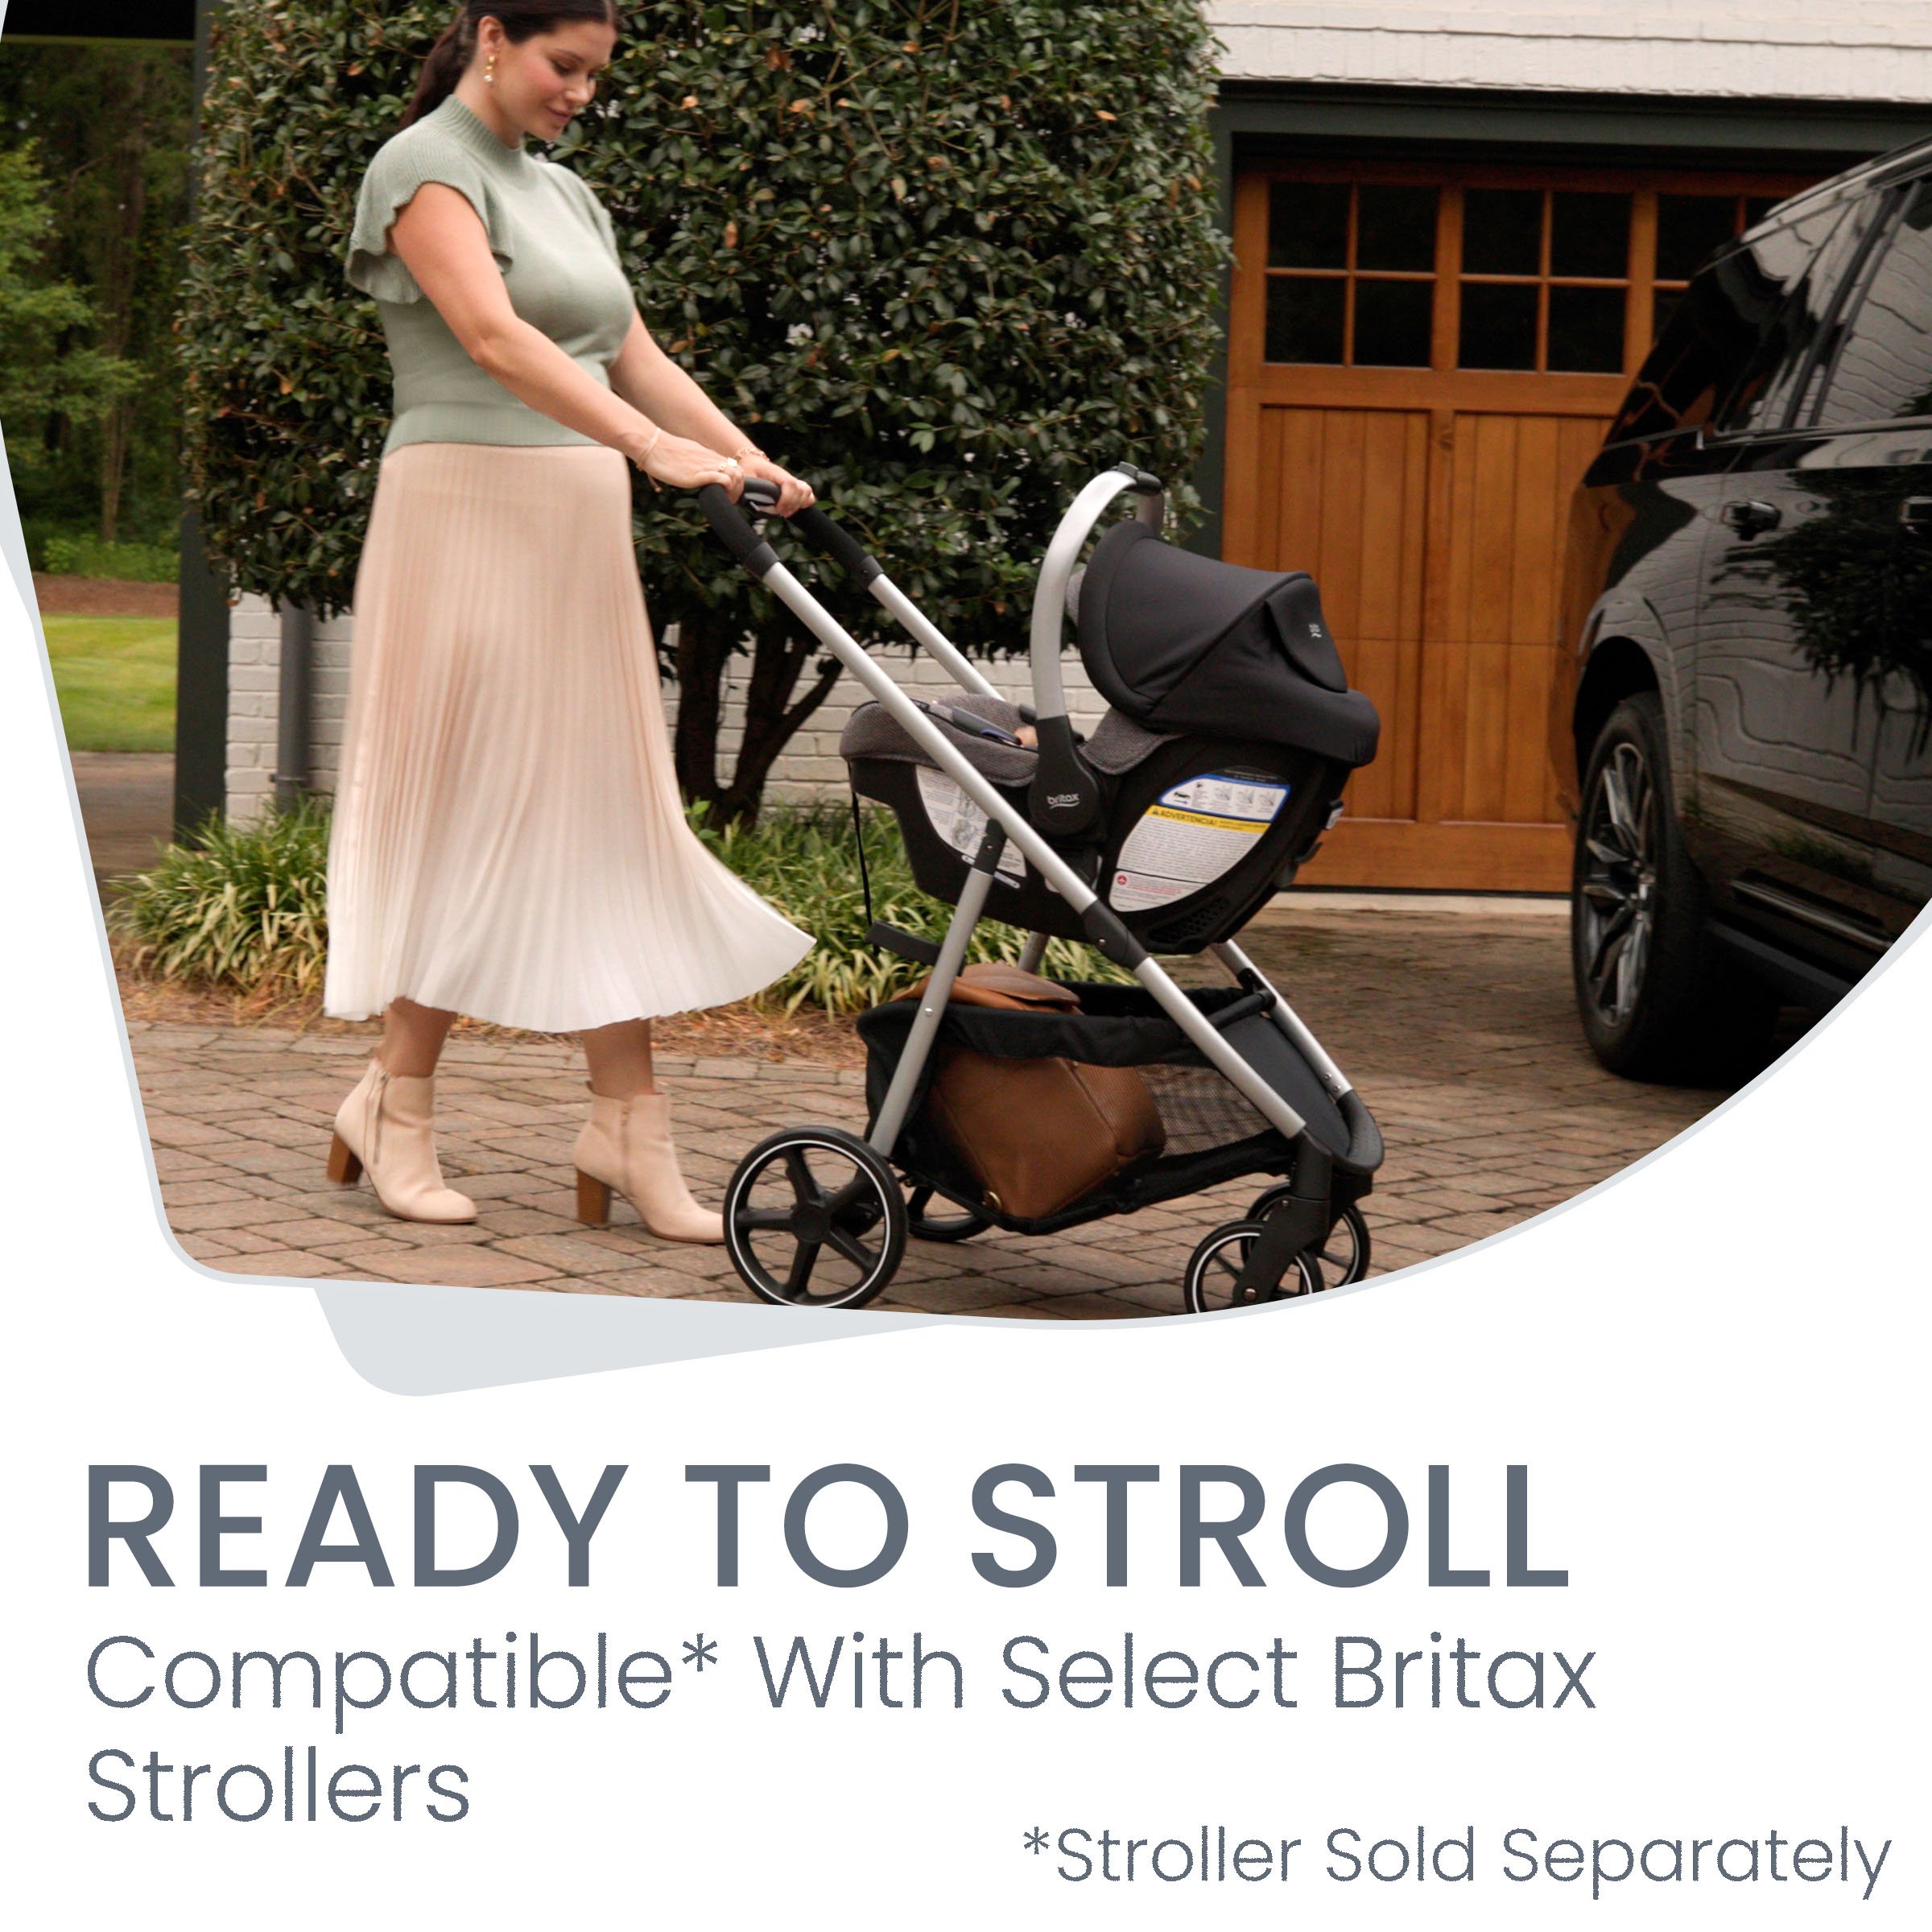 Compatible with select britax strollers